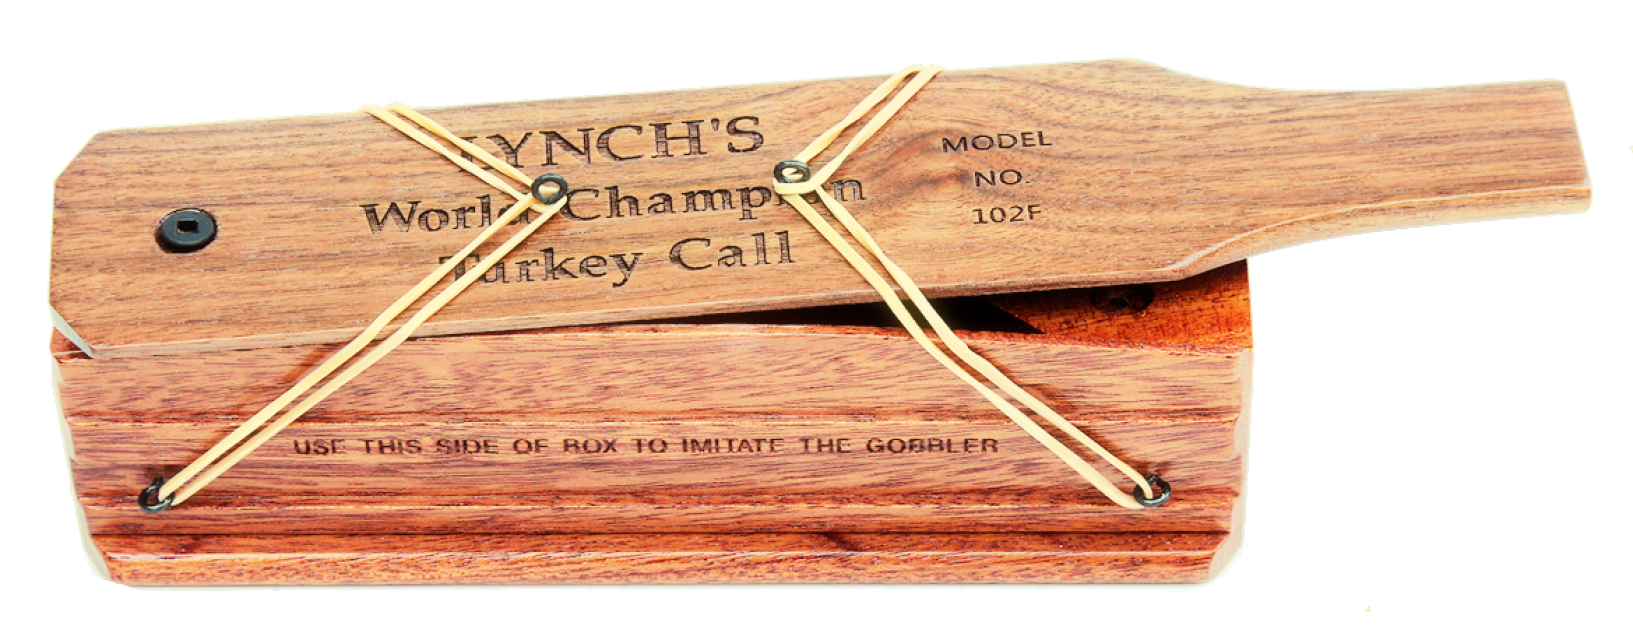 Details about   LYNCH 2002 DELUXE WORLD CHAMPION GOULD TURKEY BOX CALL COLLECTORS  